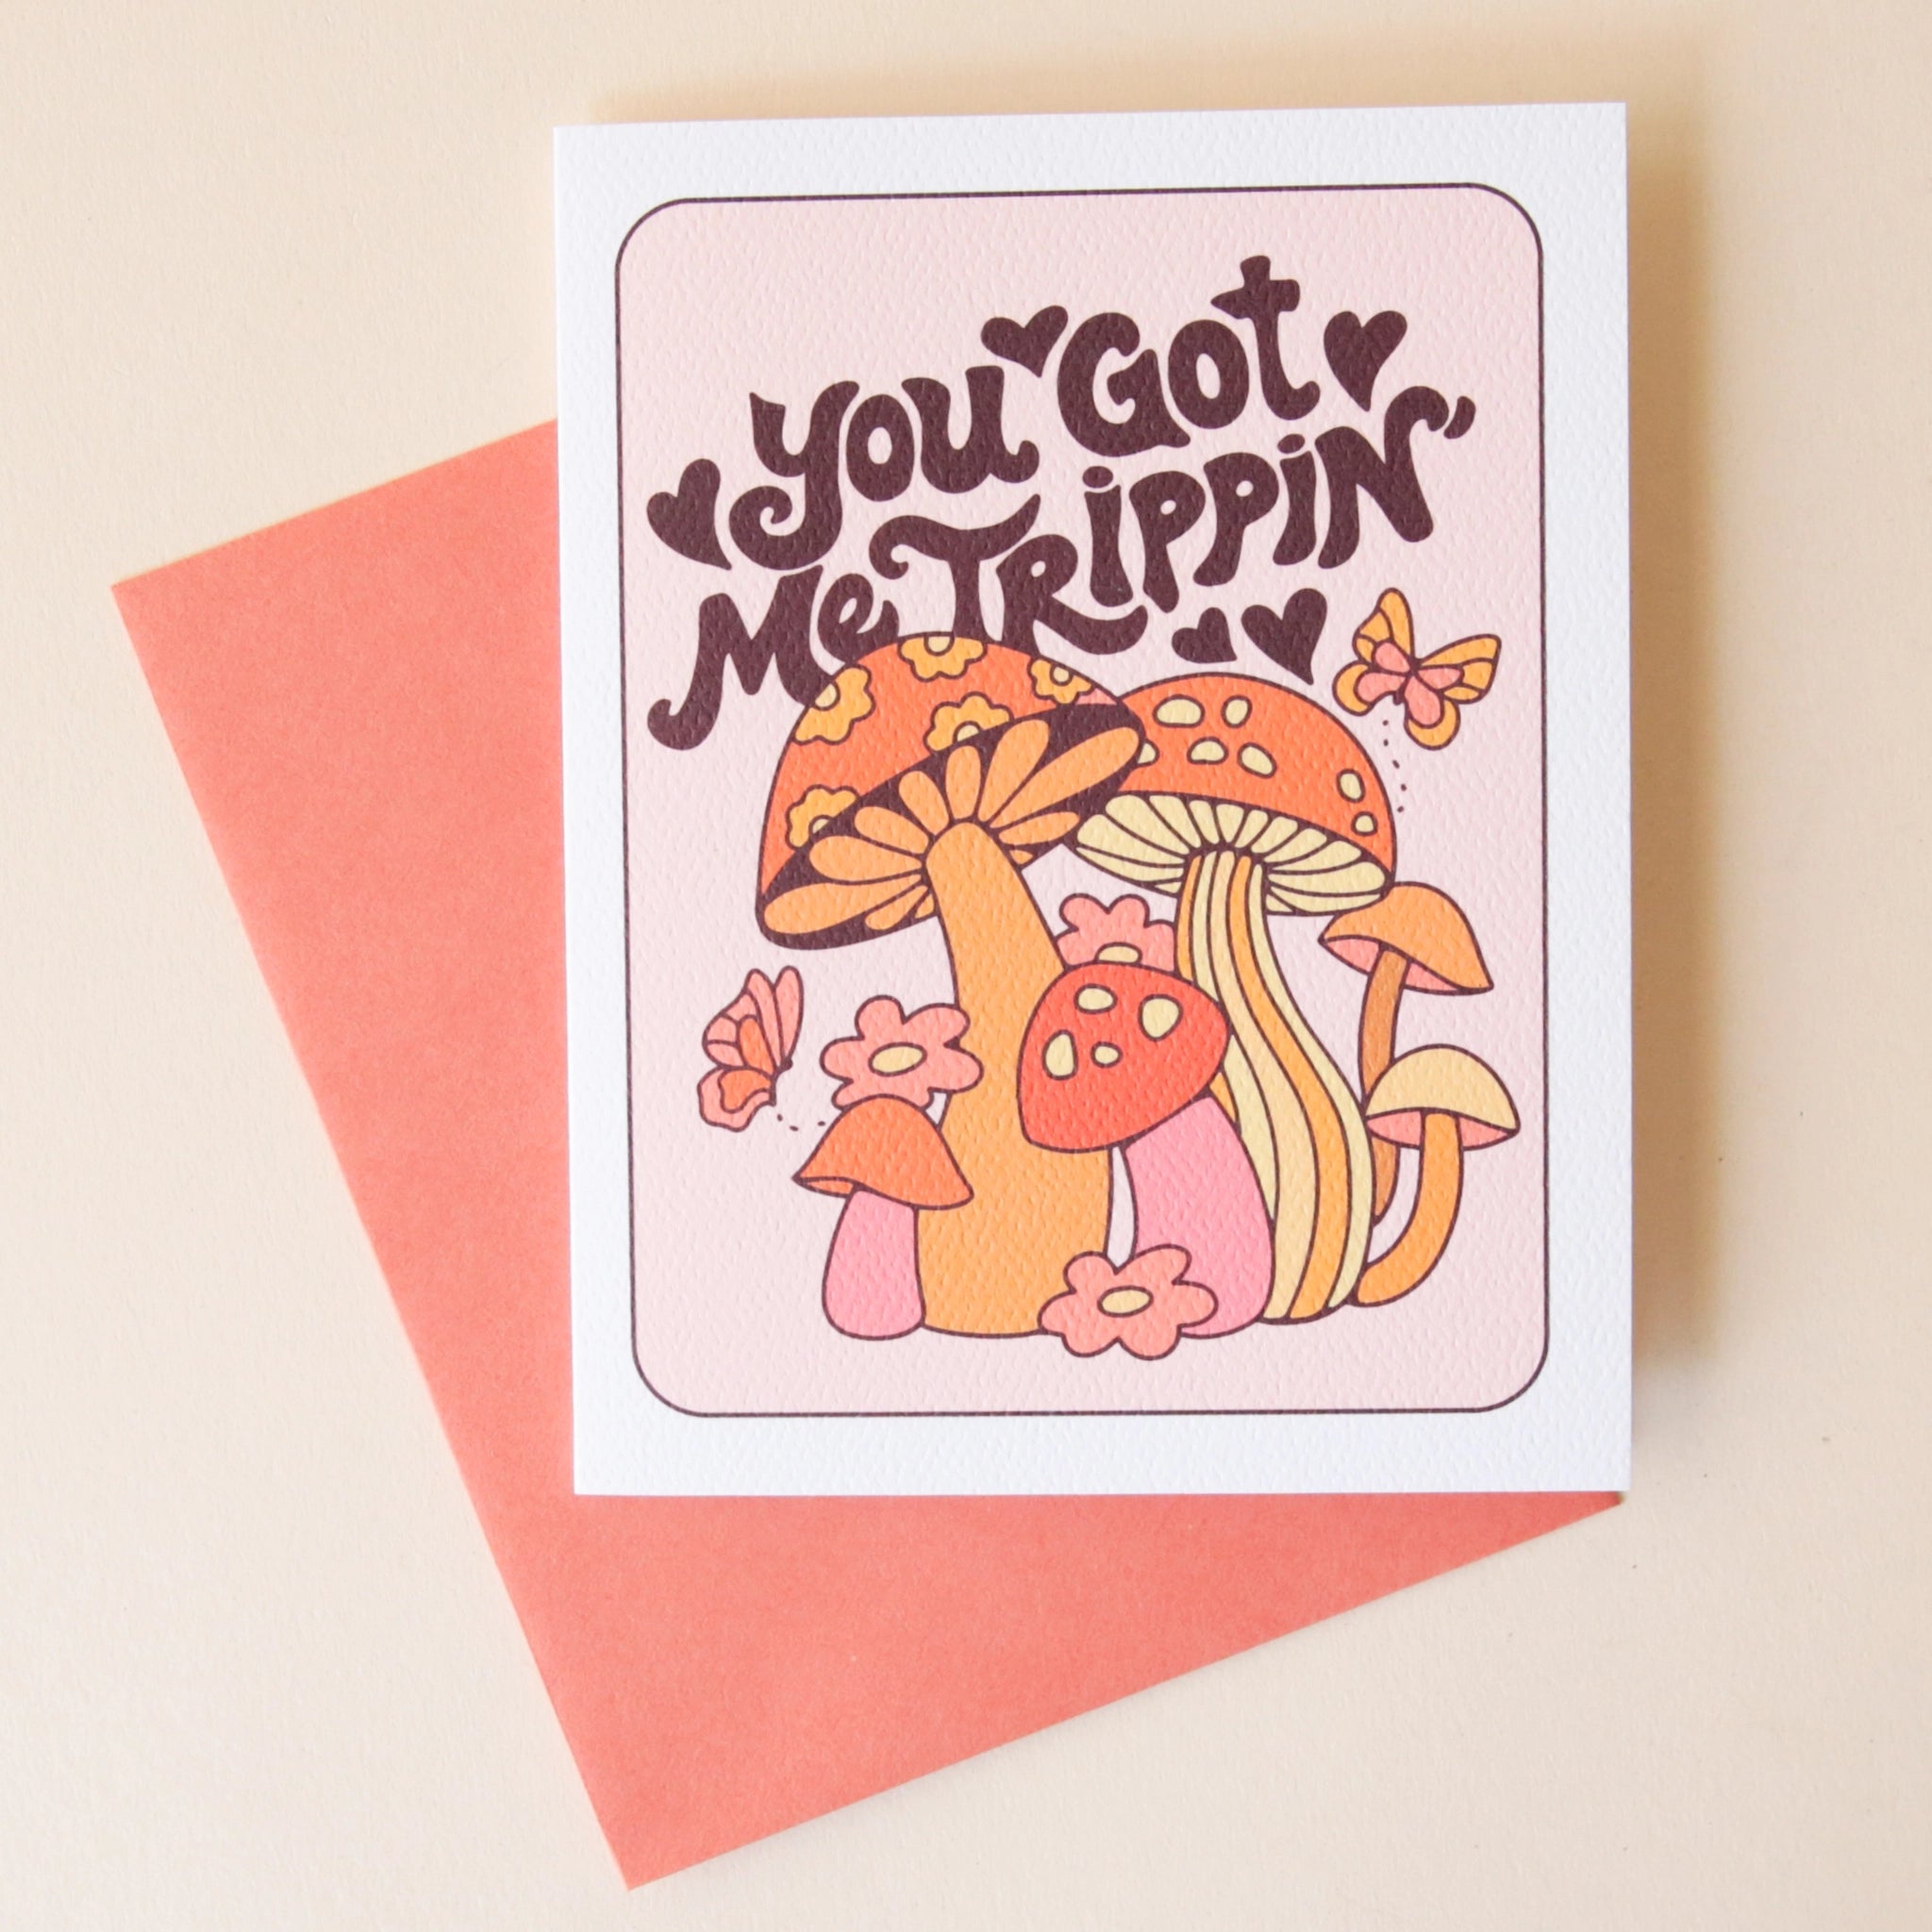 A white and light pink greeting card with mushroom and daisy graphics in the front along with groovy style font that reads, "You Got Me Trippin' in dark purple / brown letters and accompanied by a salmon pink envelope.